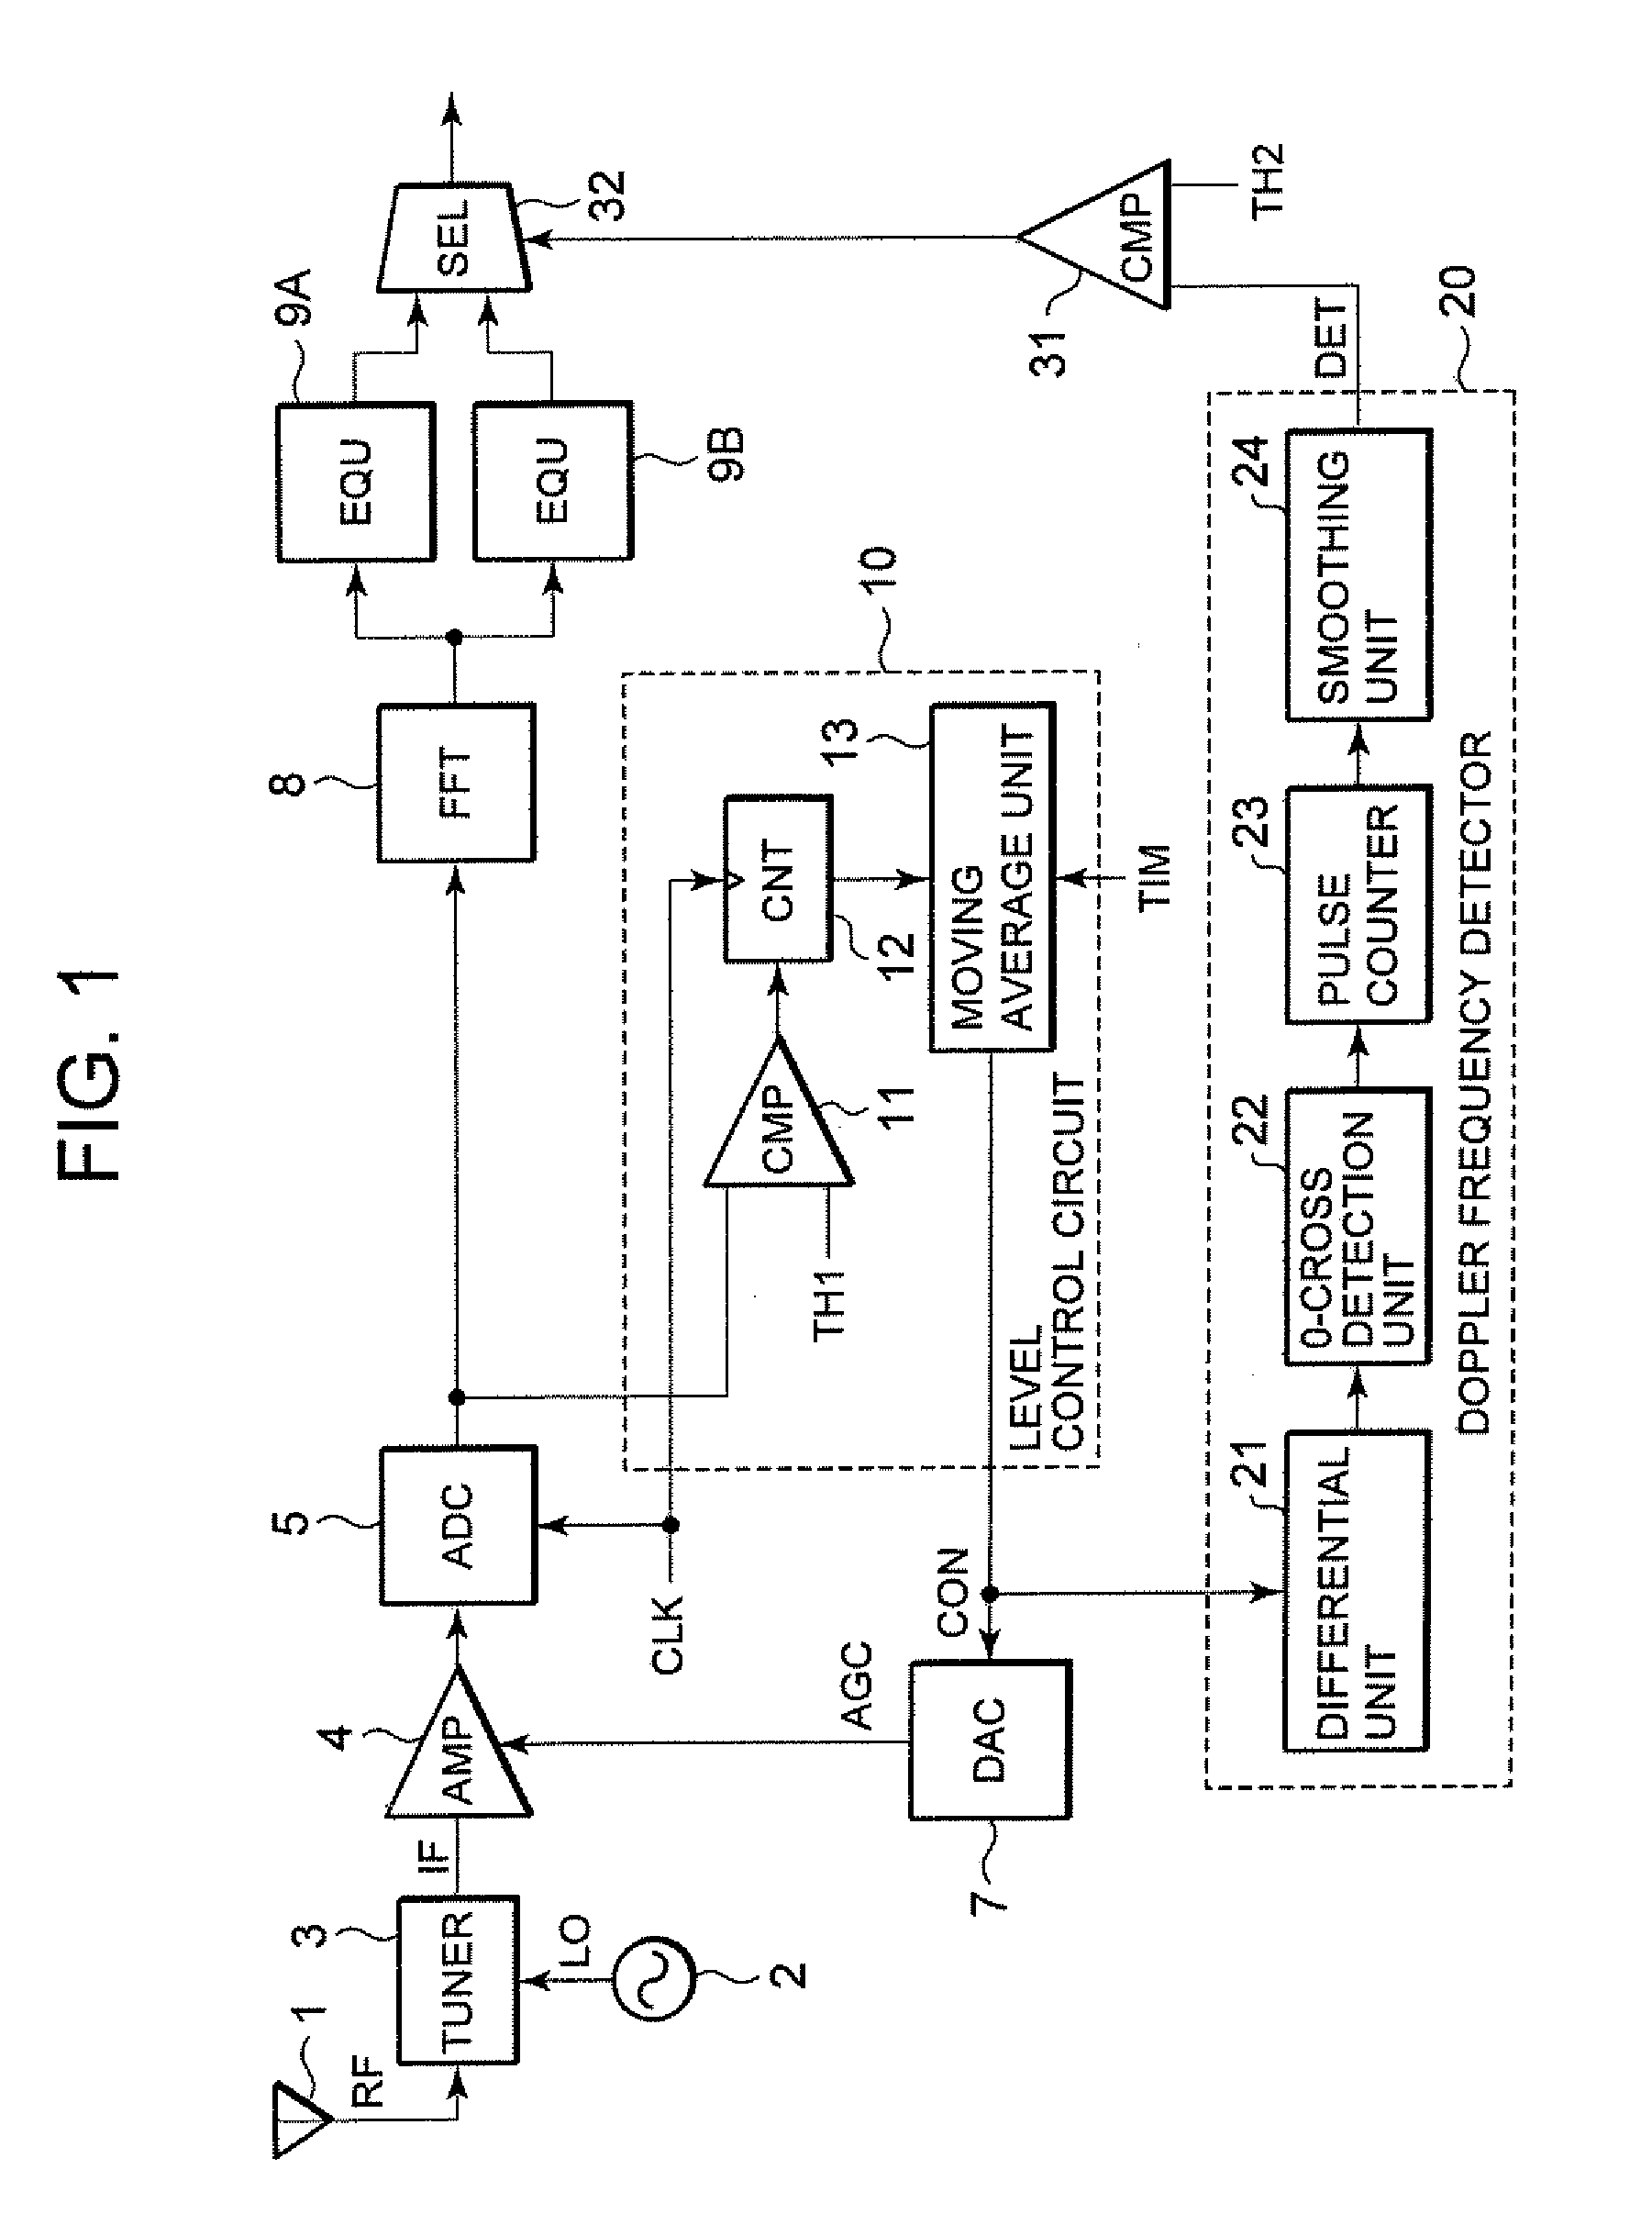 OFDM receiver and doppler frequency estimating circuit